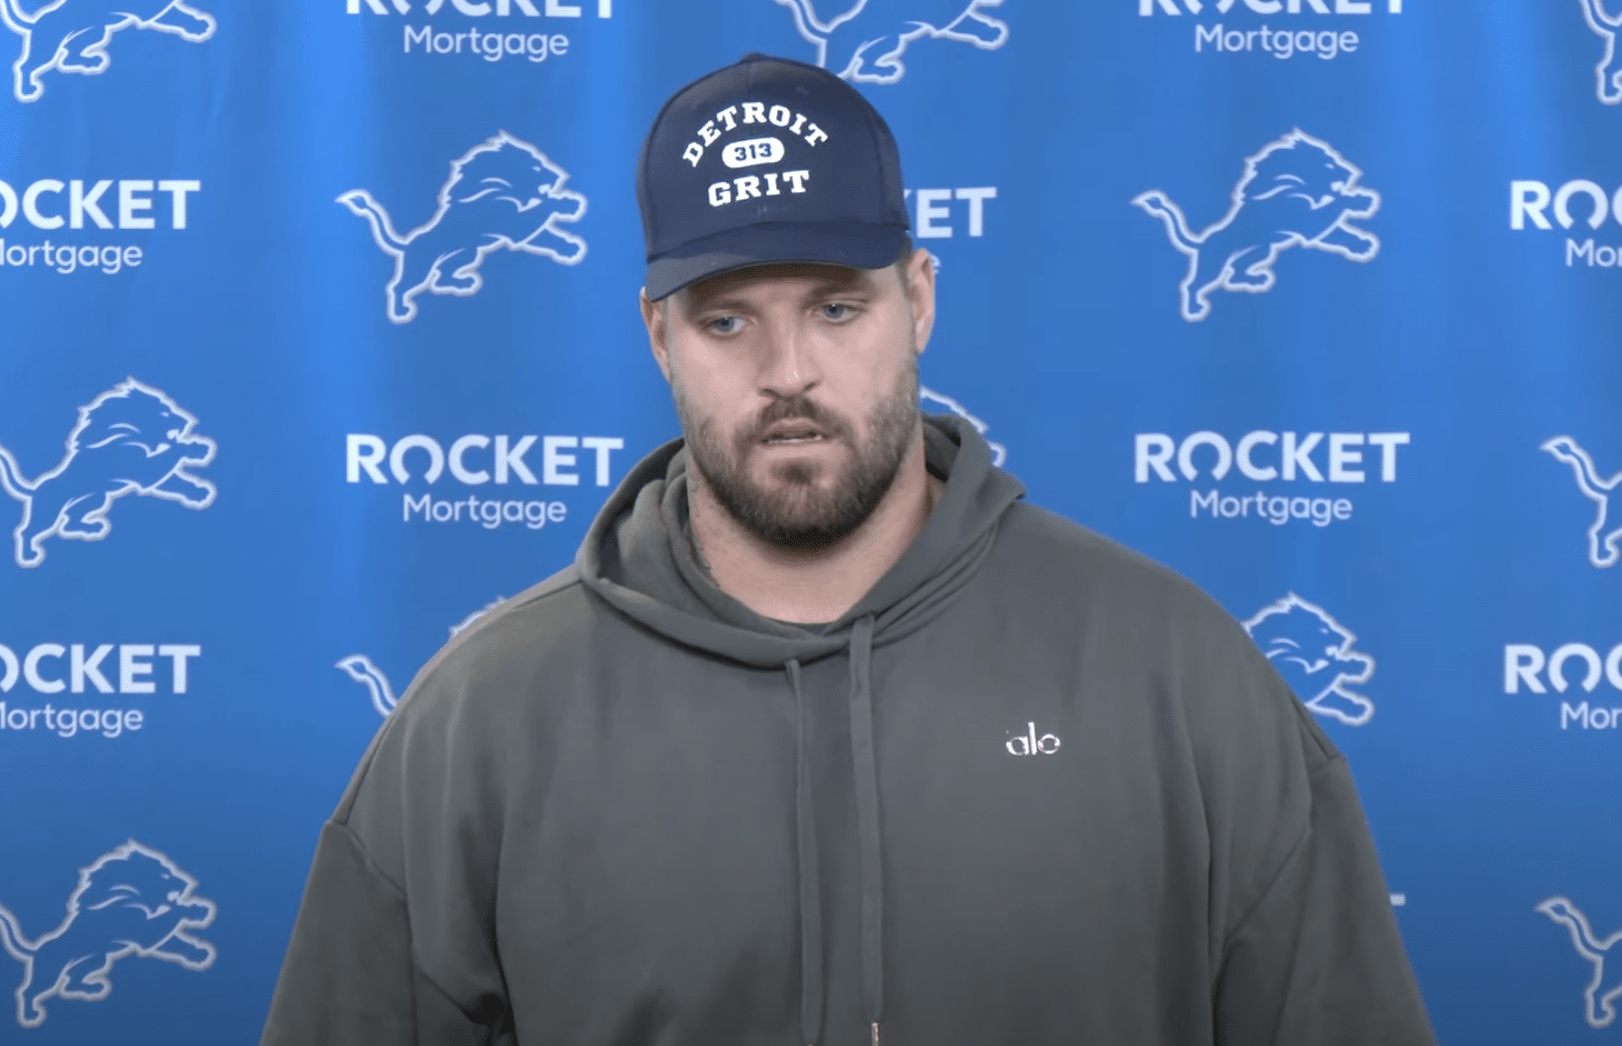 Taylor Decker cries tears of joy Detroit Lions may have tipped play call Taylor Decker does not mince words Taylor Decker breaks down in tears Taylor Decker has message for Detroit Lions fans